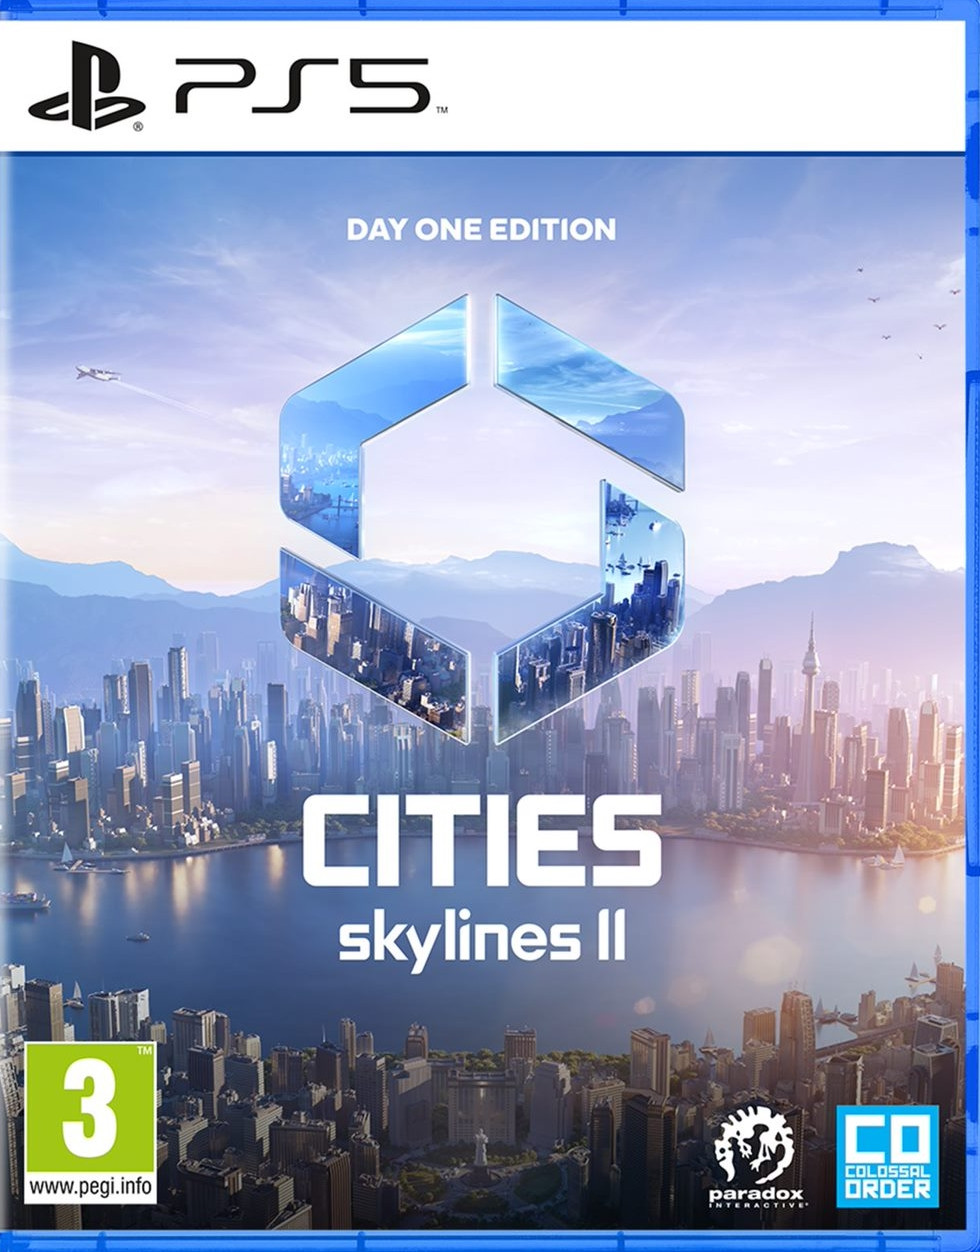 Cities Skylines 2 - Day One Edition (PS5), Paradox Interactive